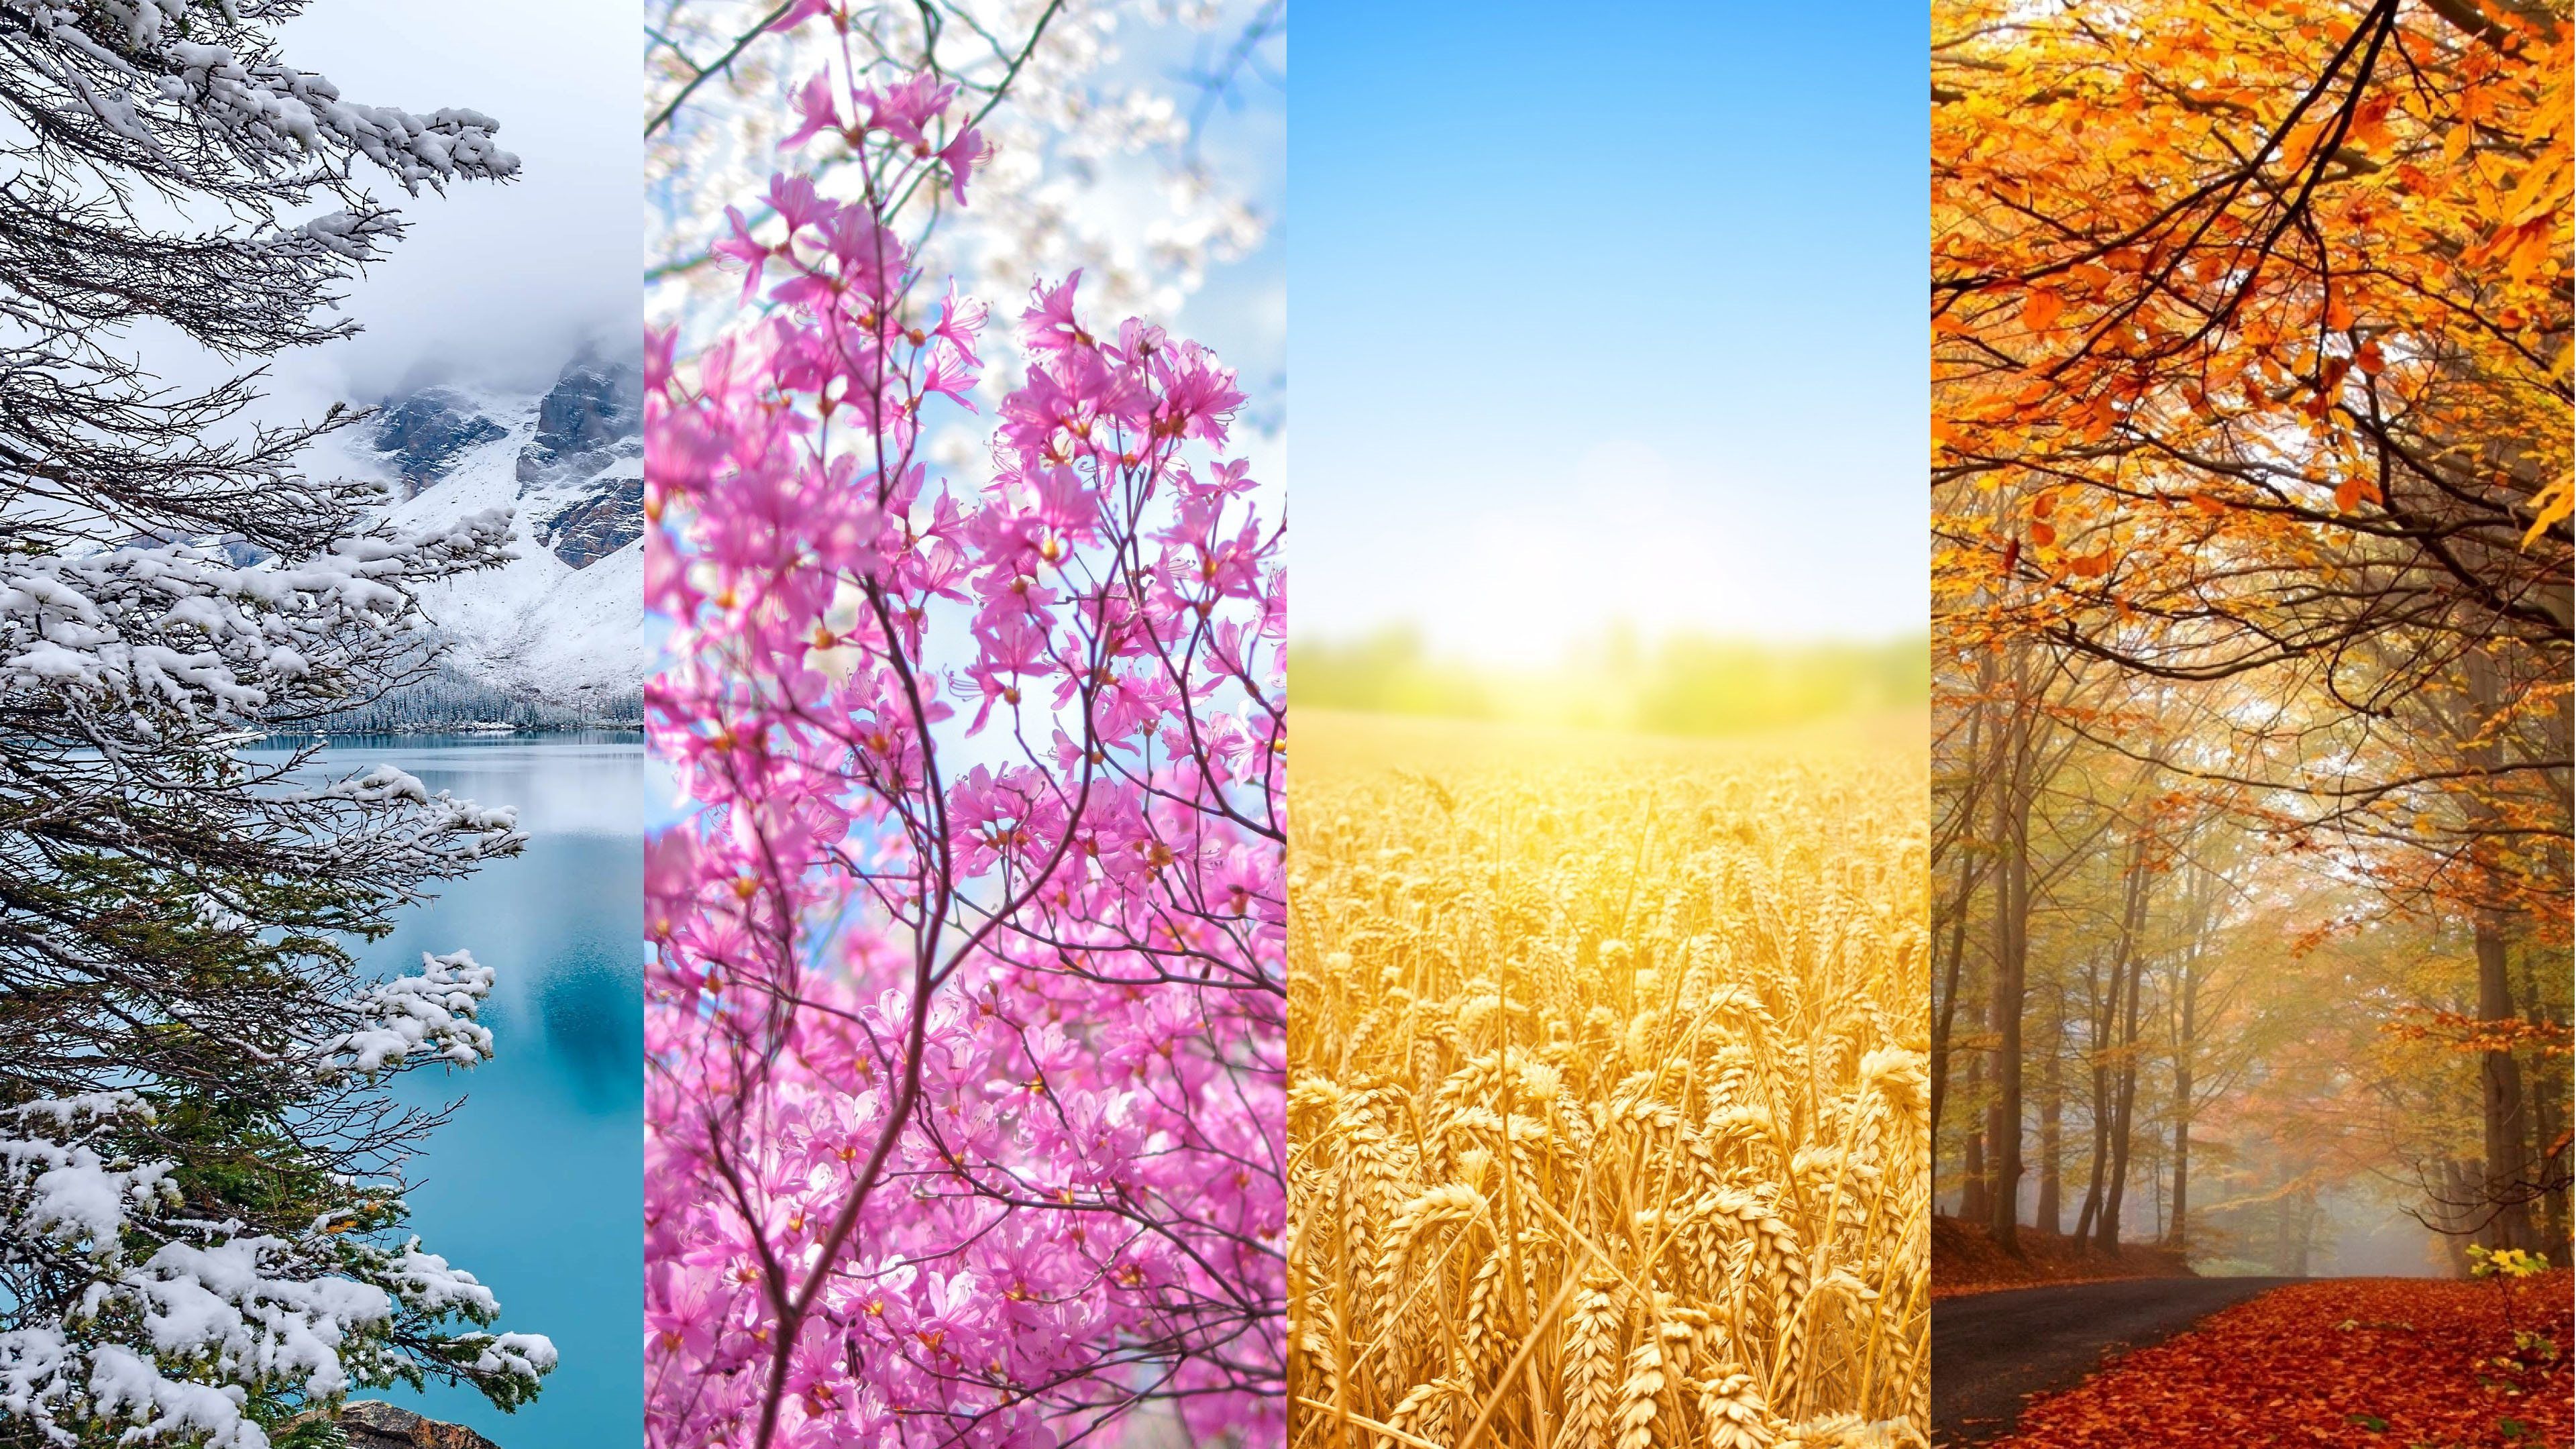 Download wallpaper four seasons, seasons, winter, spring, autumn, summer, 4K for desktop with resolution 3840x2160. High Quality HD picture wallpaper